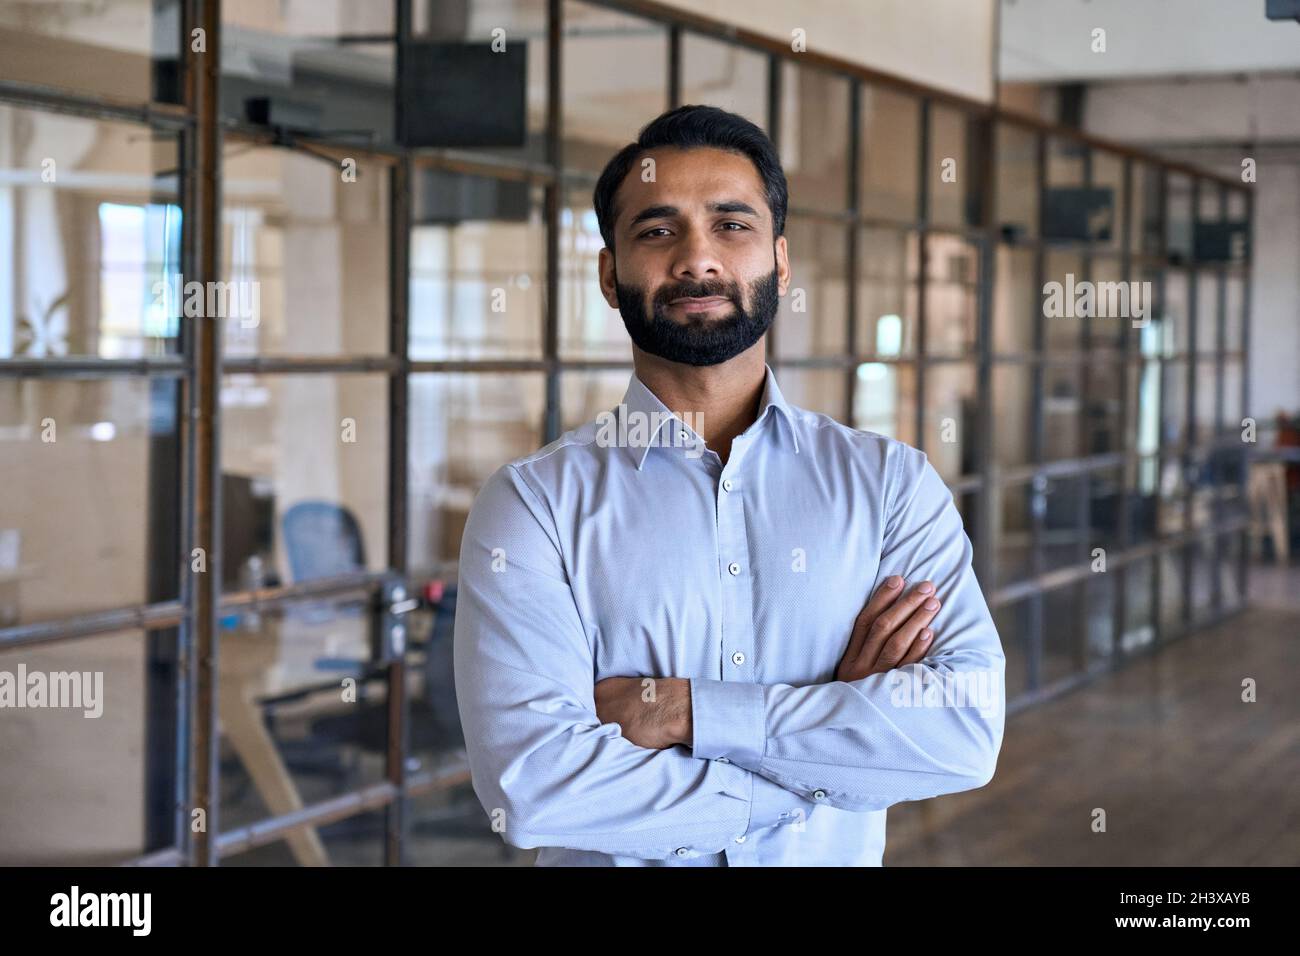 Confident successful indian businessman looking at camera standing in office. Stock Photo